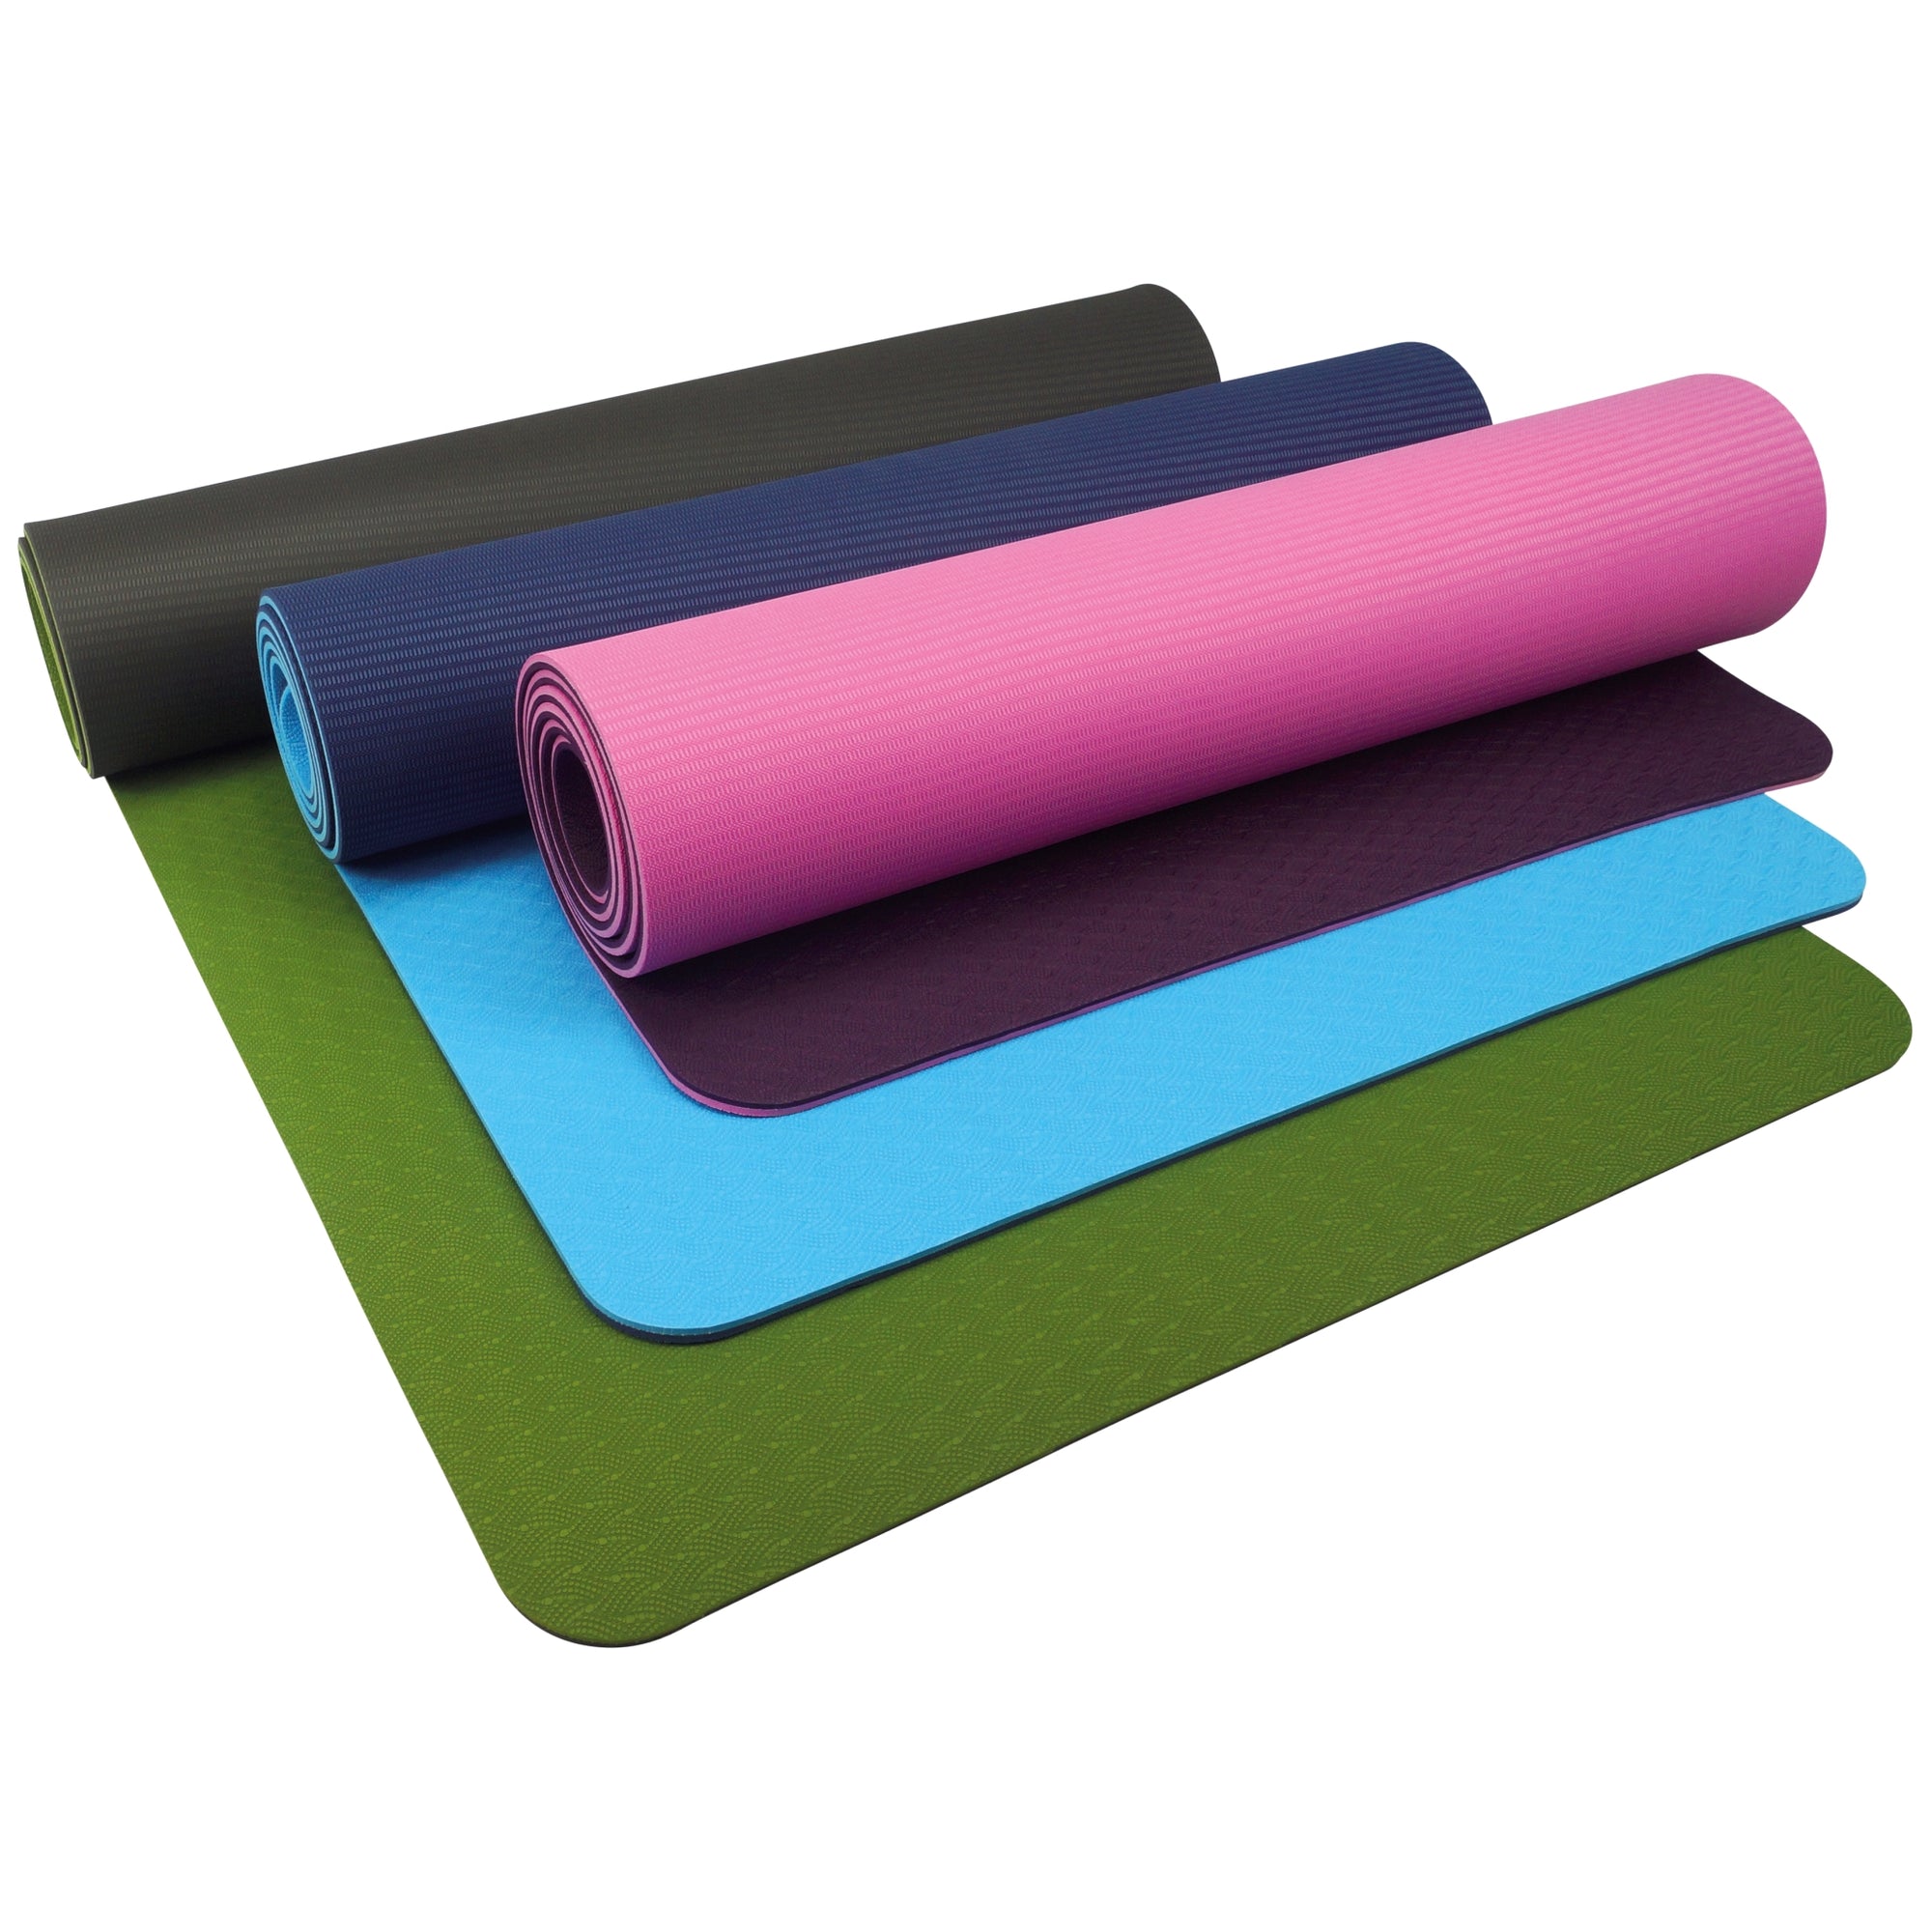  UFE 6mm TPE Yoga Mats laid on top of one another with contrast top to bottom in 3 different colour variations; sky/navy, mulberry/pink and olive/charcoal